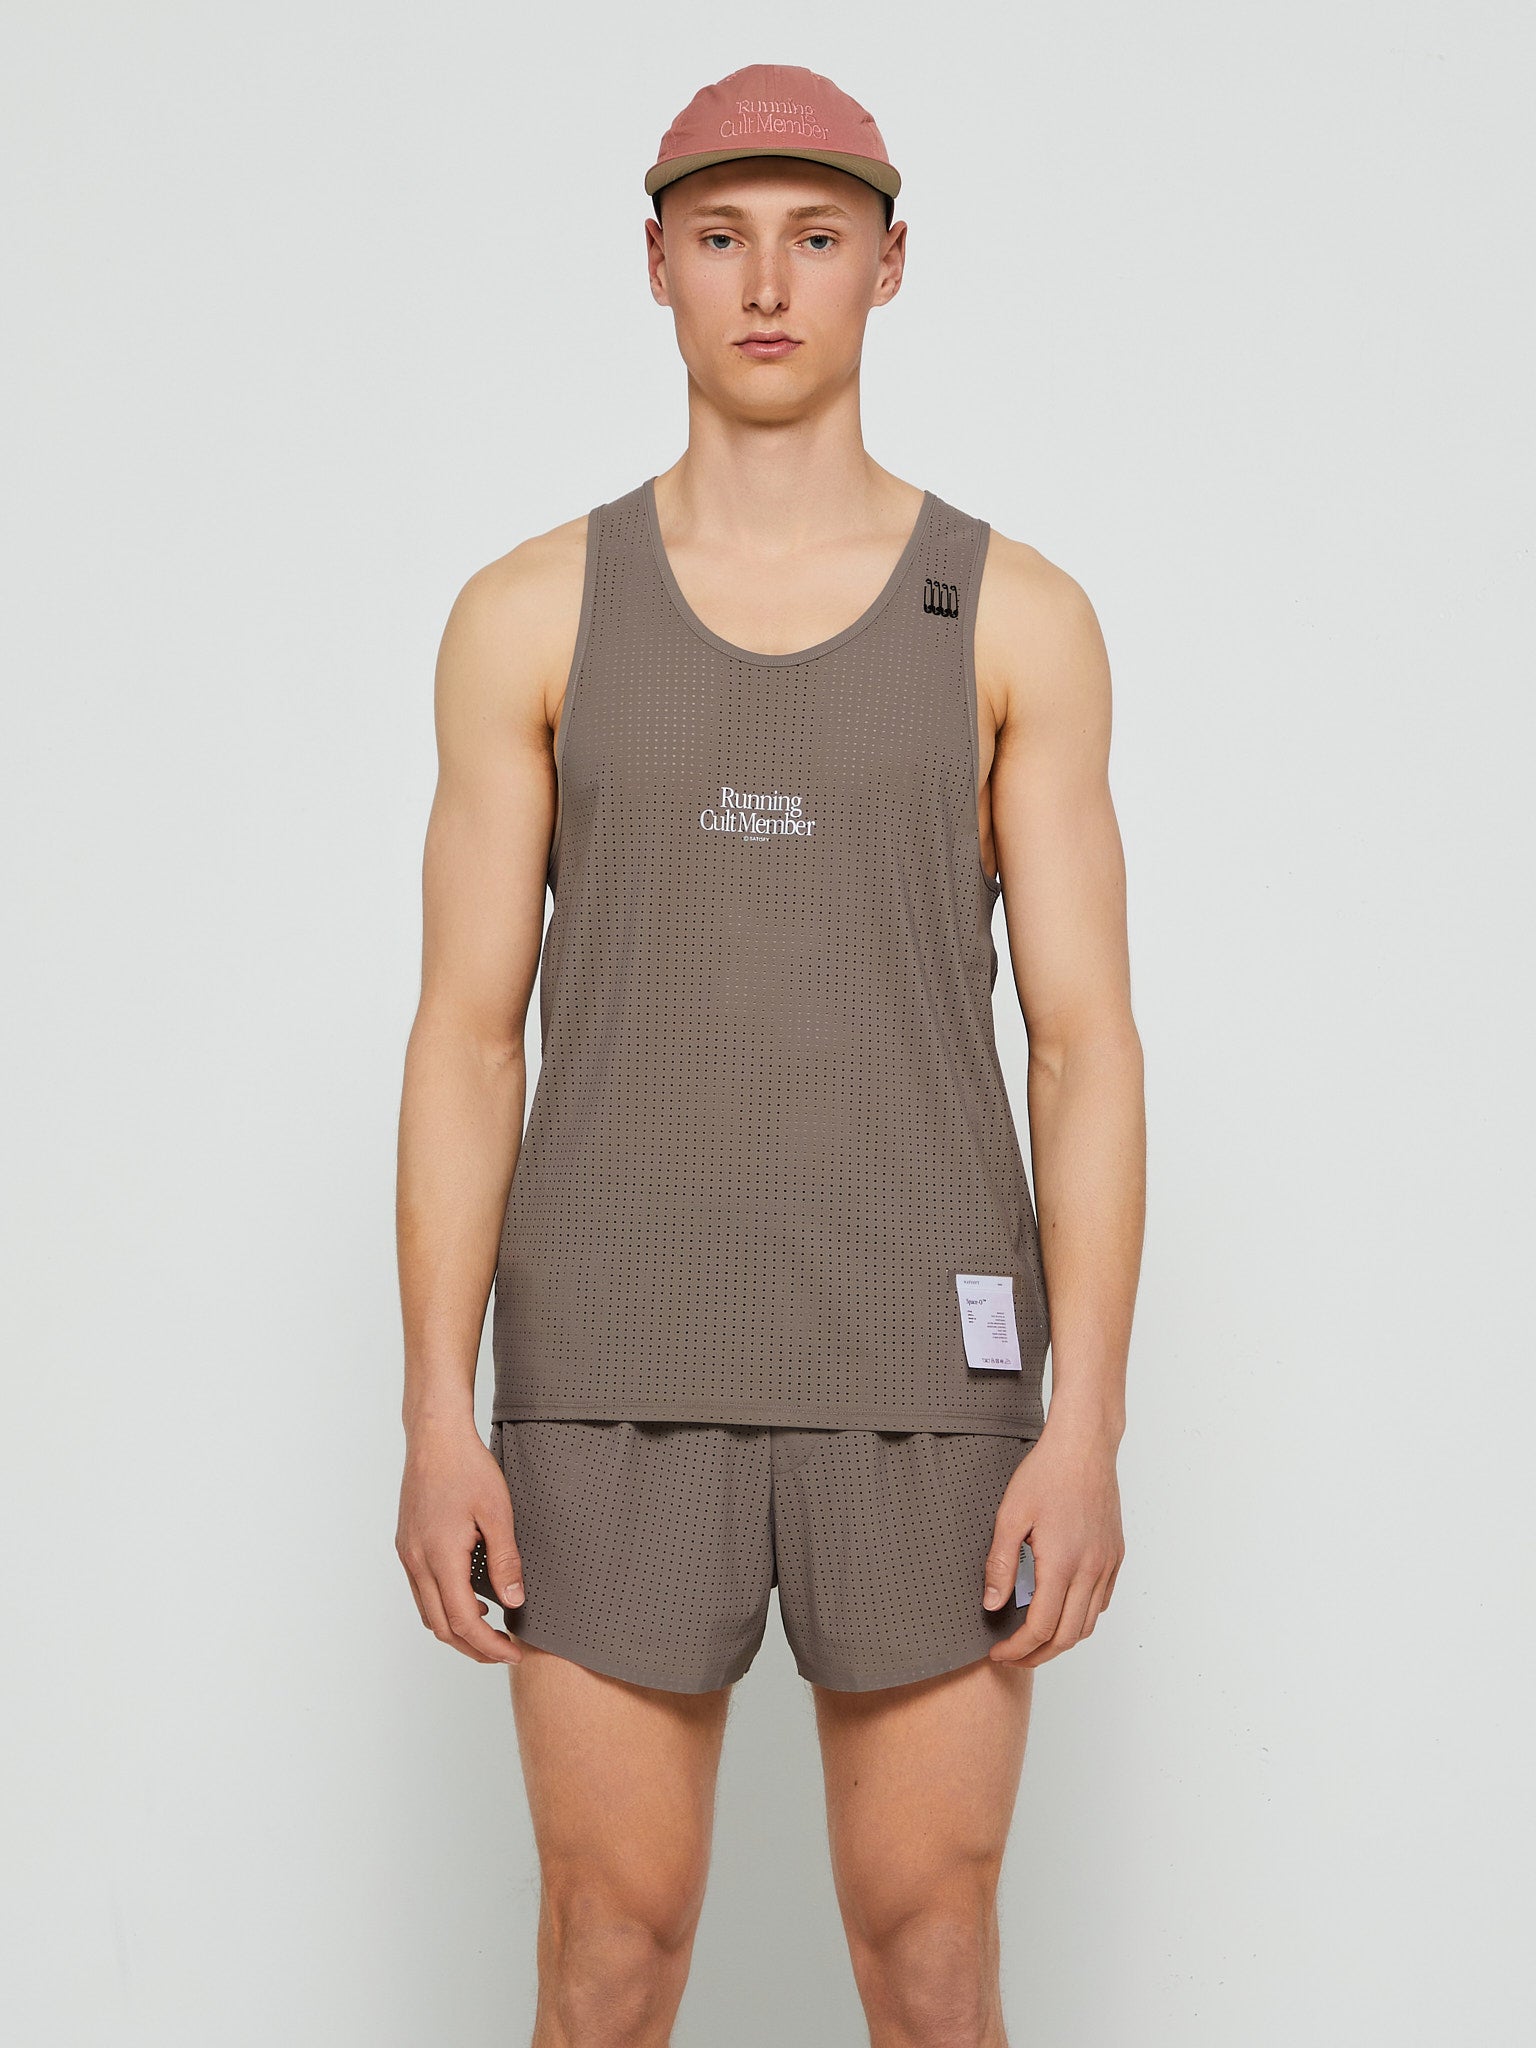 Satisfy - Space-O Singlet T-Shirt in Taupe